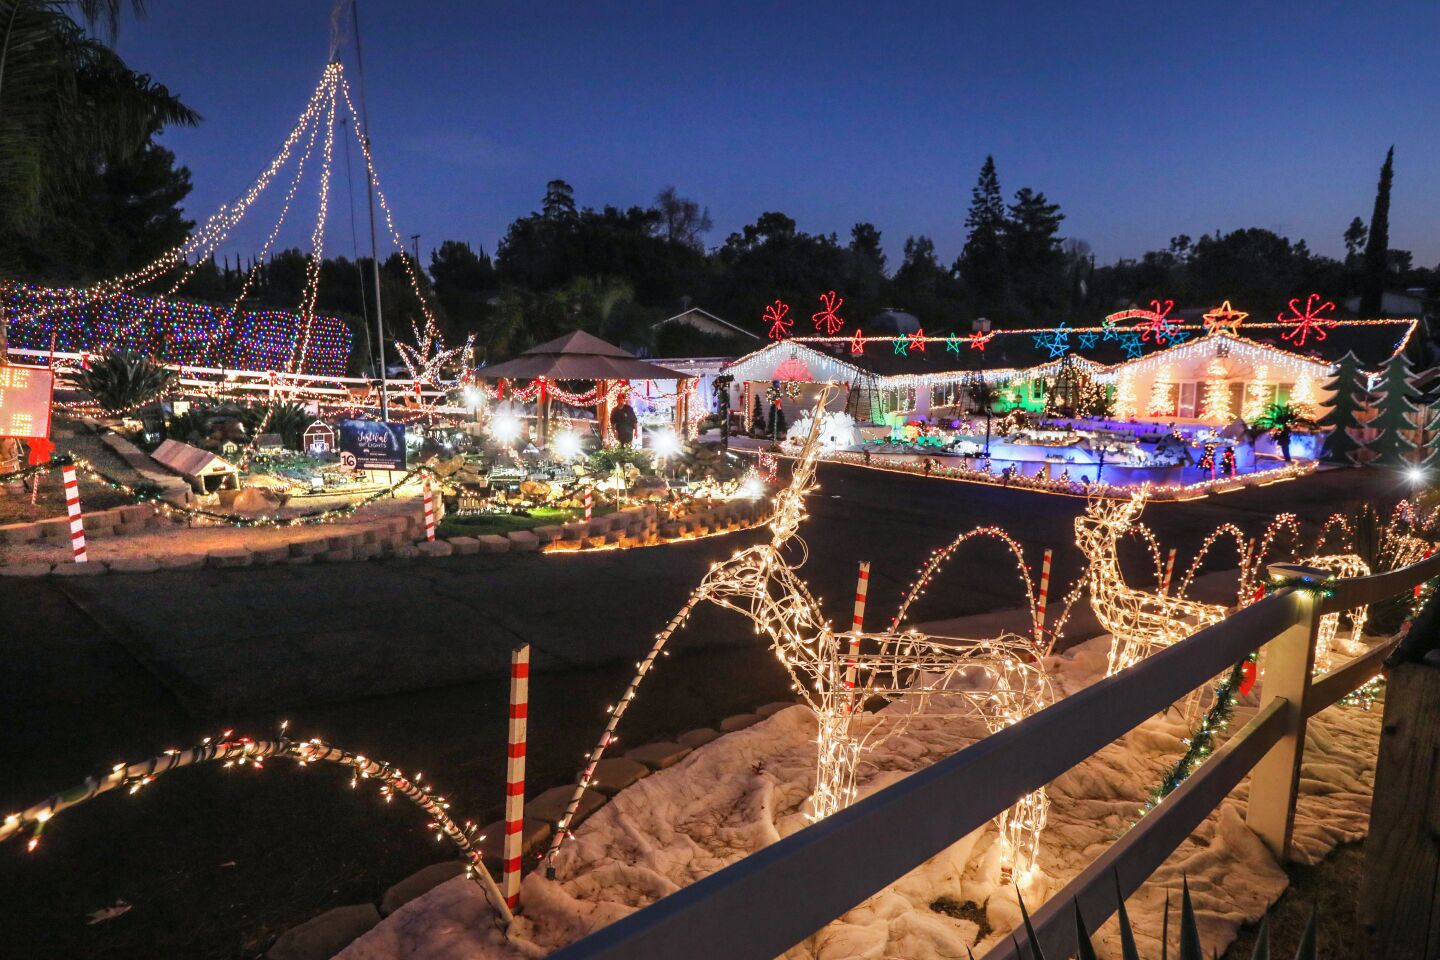 Christmas decorations light up the home of Mack Schreiber on Reche Road in Fallbrook.